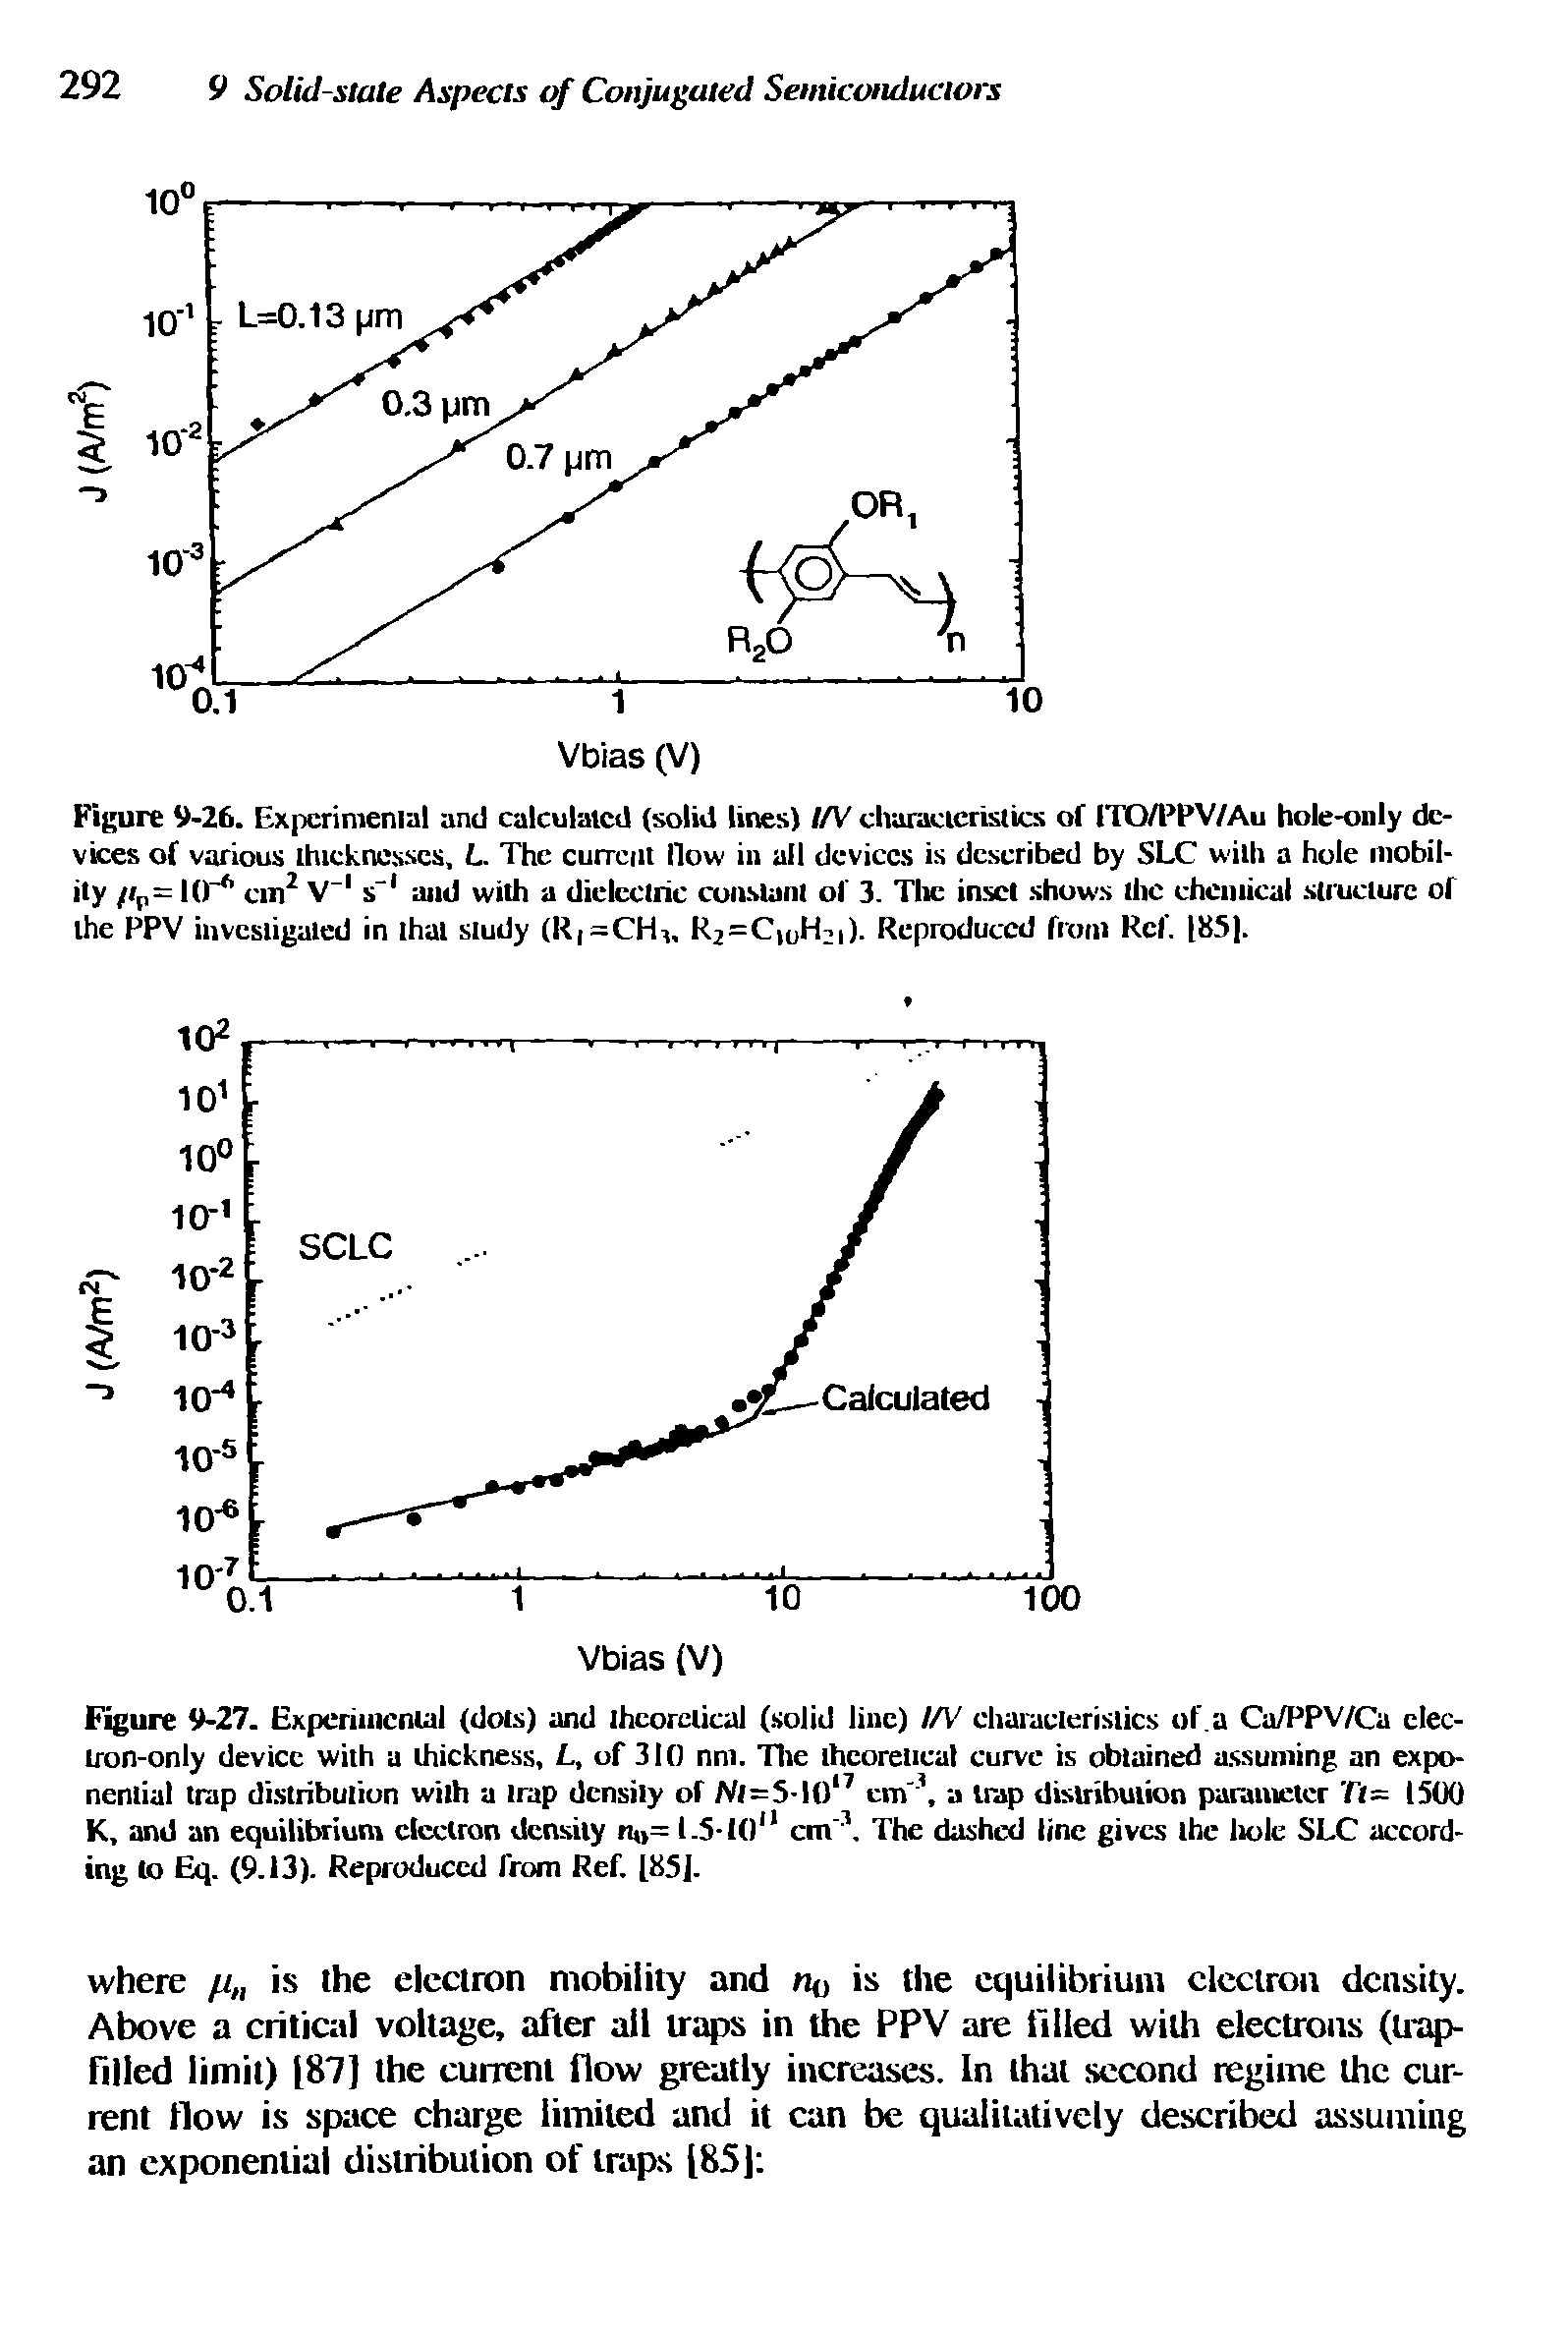 Figure 9-27. Experimental (dots) and theoretical (solid line) t/V characteristics of. a Ca/PPV/Ca electron-only device with a thickness, L, of 310 nm. The theoretical curve is obtained assuming an exponential trap distribution with a trap density of Nt=5-I()17 cm 1, a trap distribution parameter Tt 1500 K, and an equilibrium electron density n = L5-I011 cm"1. The dashed line gives the hole SLC according to Eq. (9.13). Reproduced from Ref. 85J.